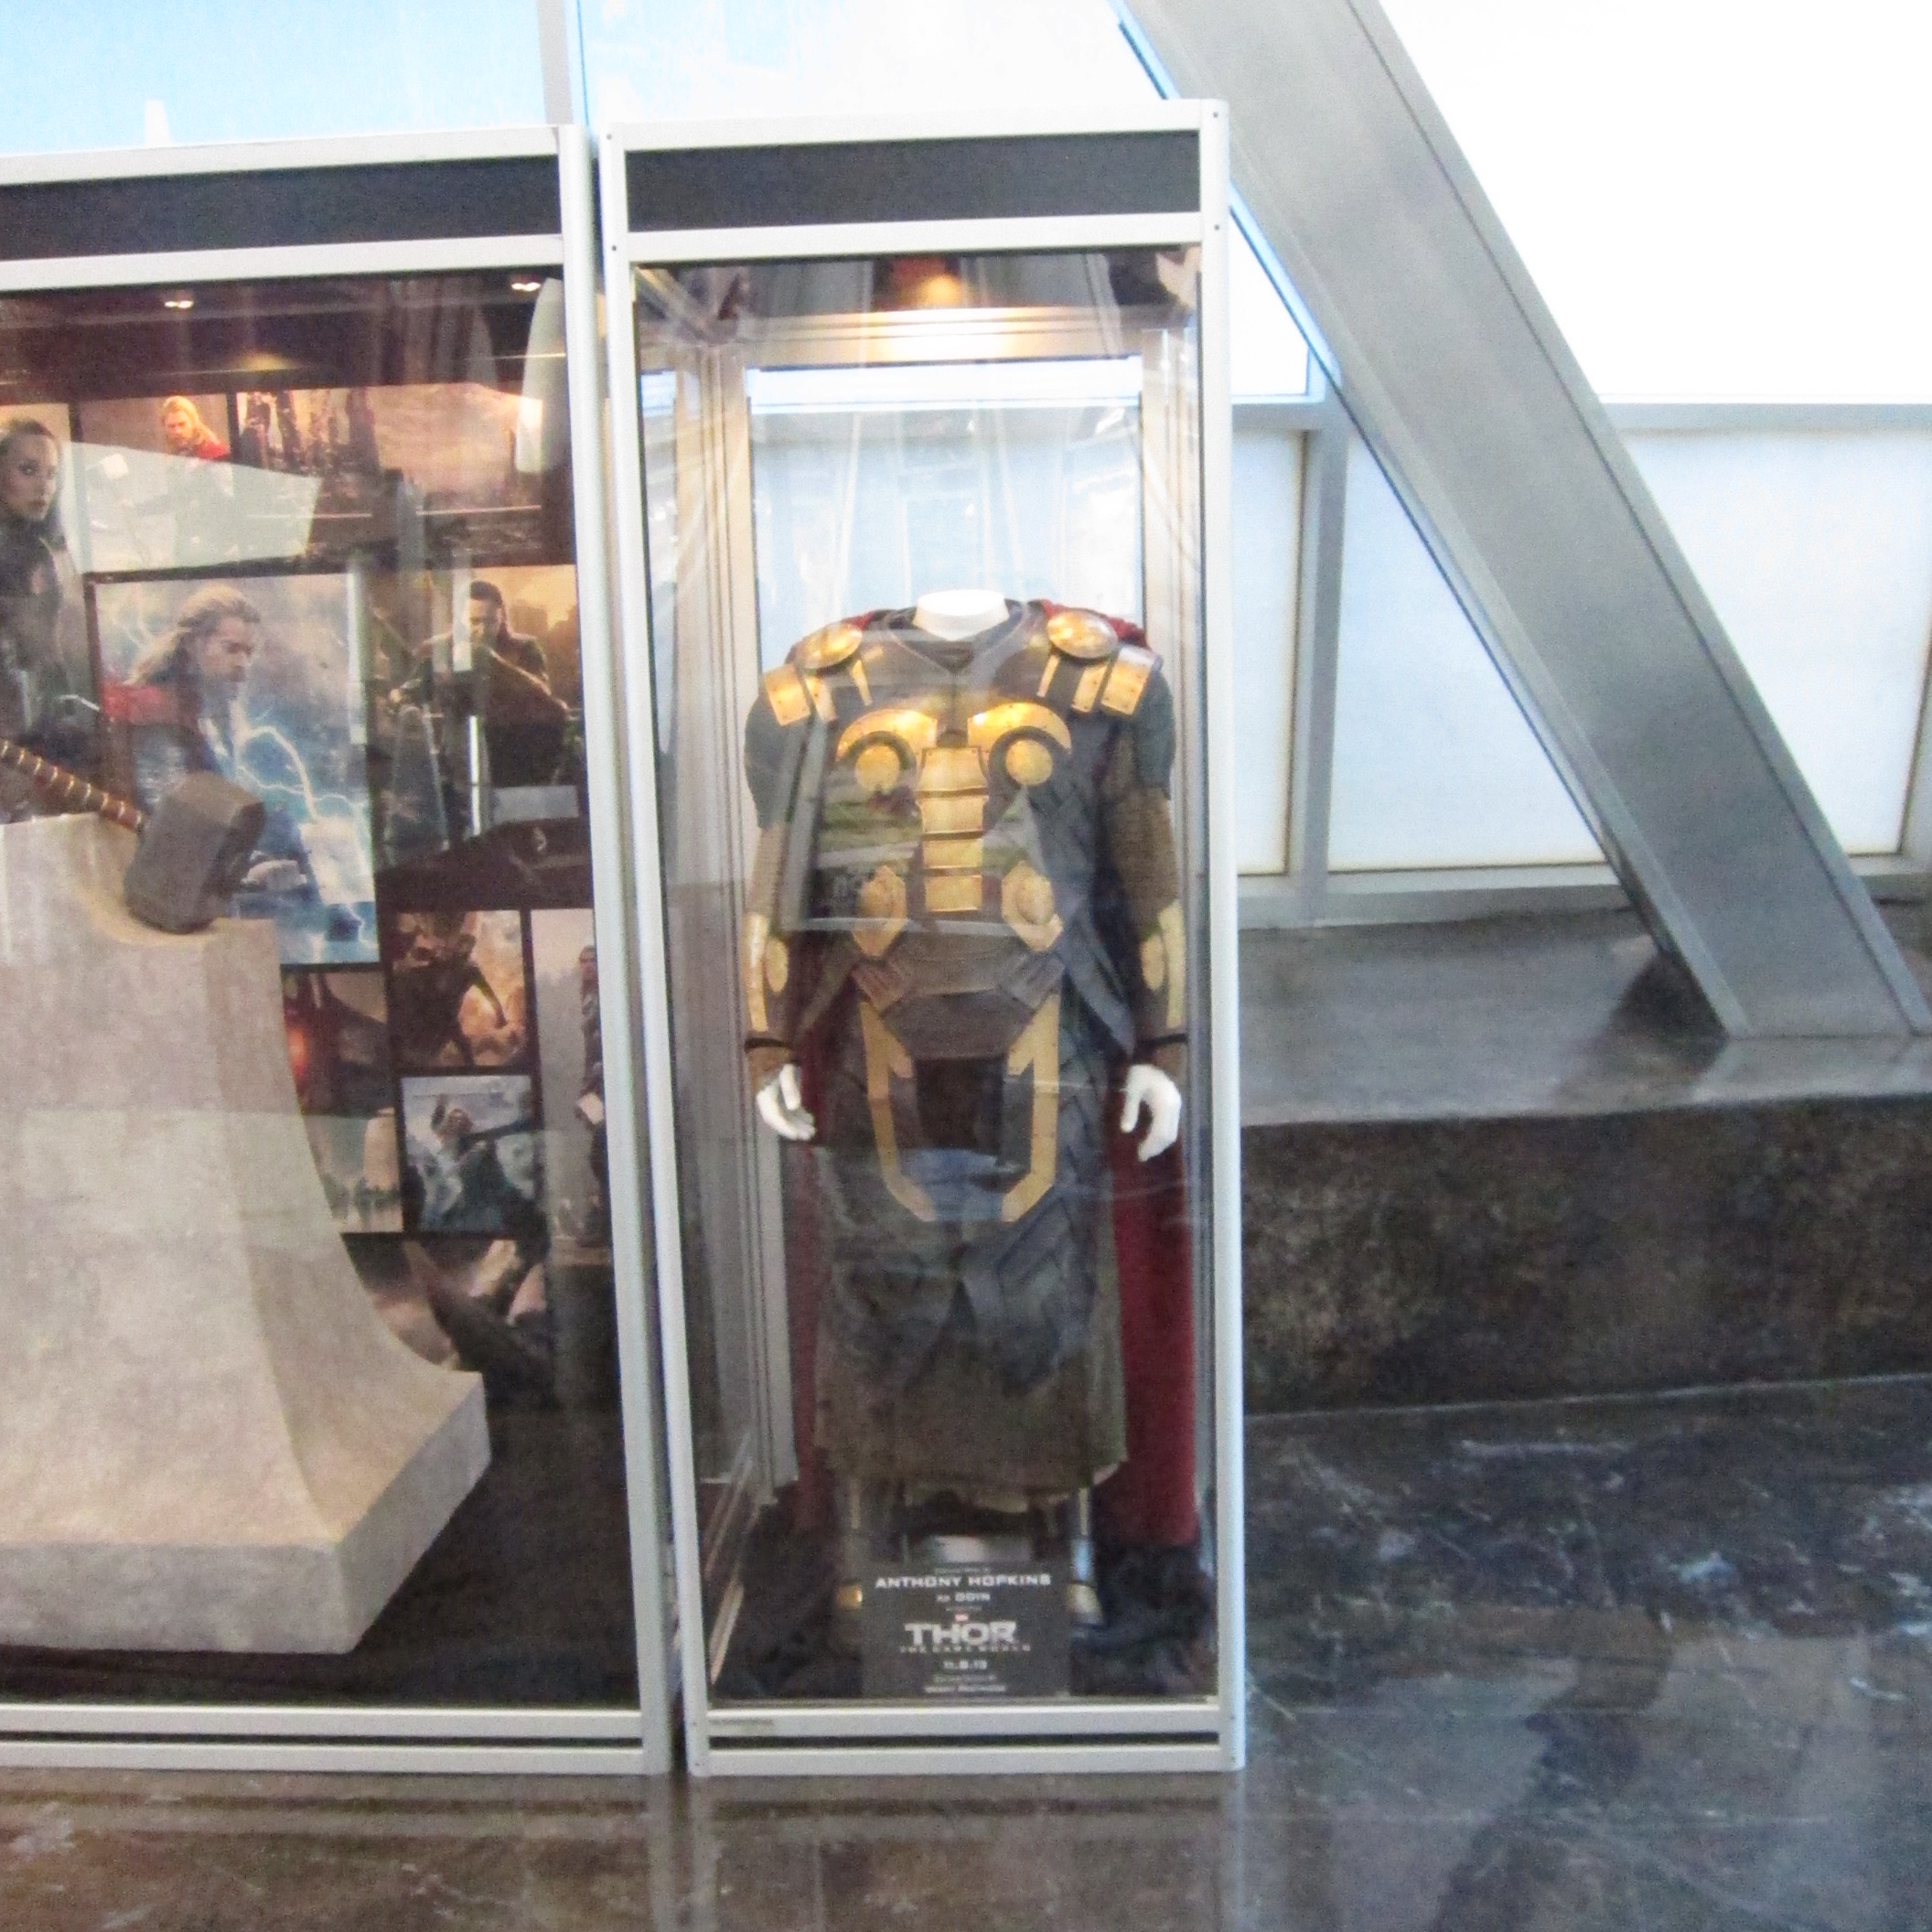 Anthony Hopkins' costume as worn in THOR:  THE DARK WORLD.